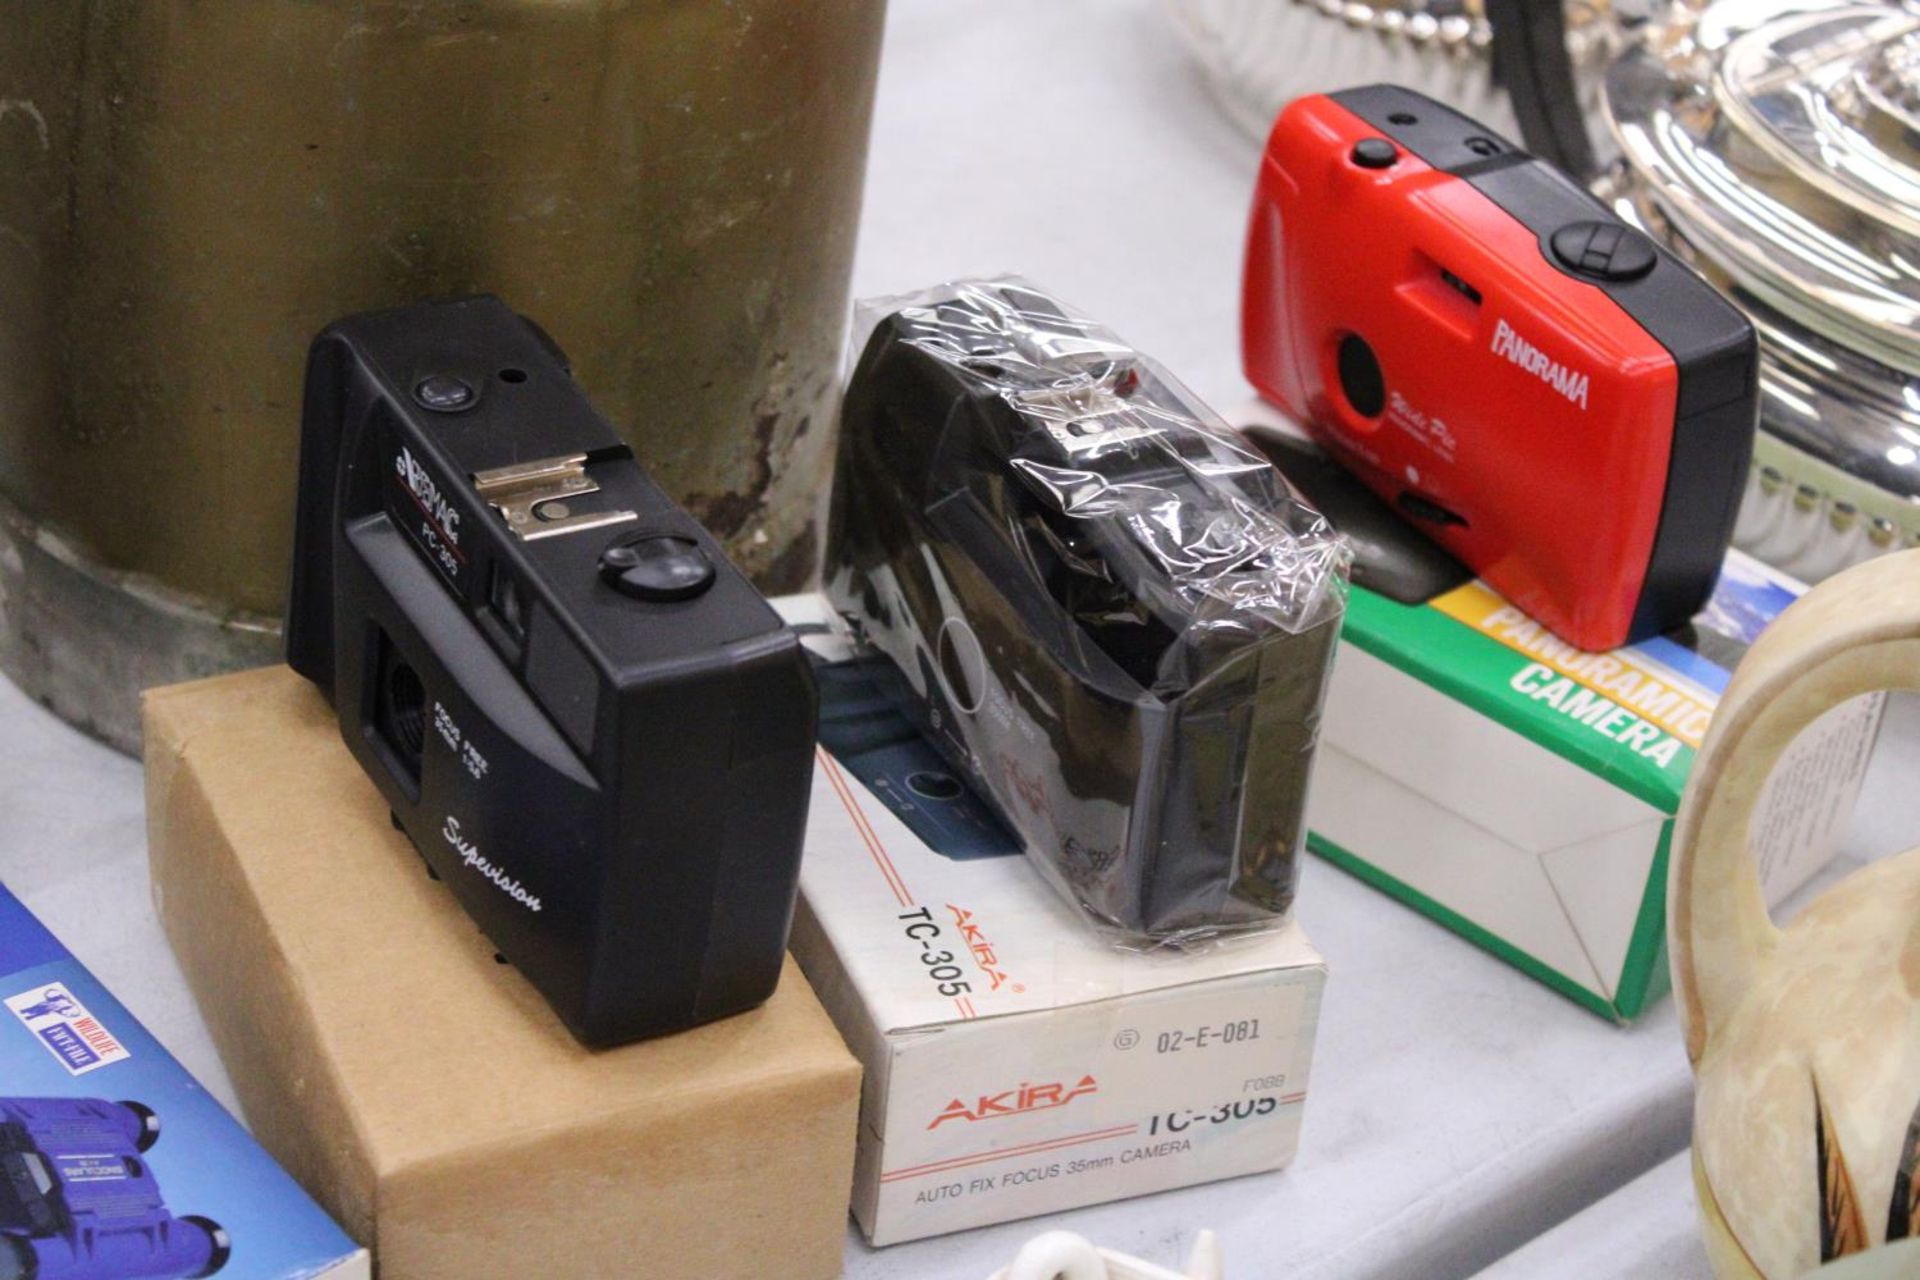 A MIXED LOT OF CAMERAS TO INCLUDE AKIRA, PANORAMA AND REMAC PLUS A PAIR OF BINOCULARS - Image 5 of 5